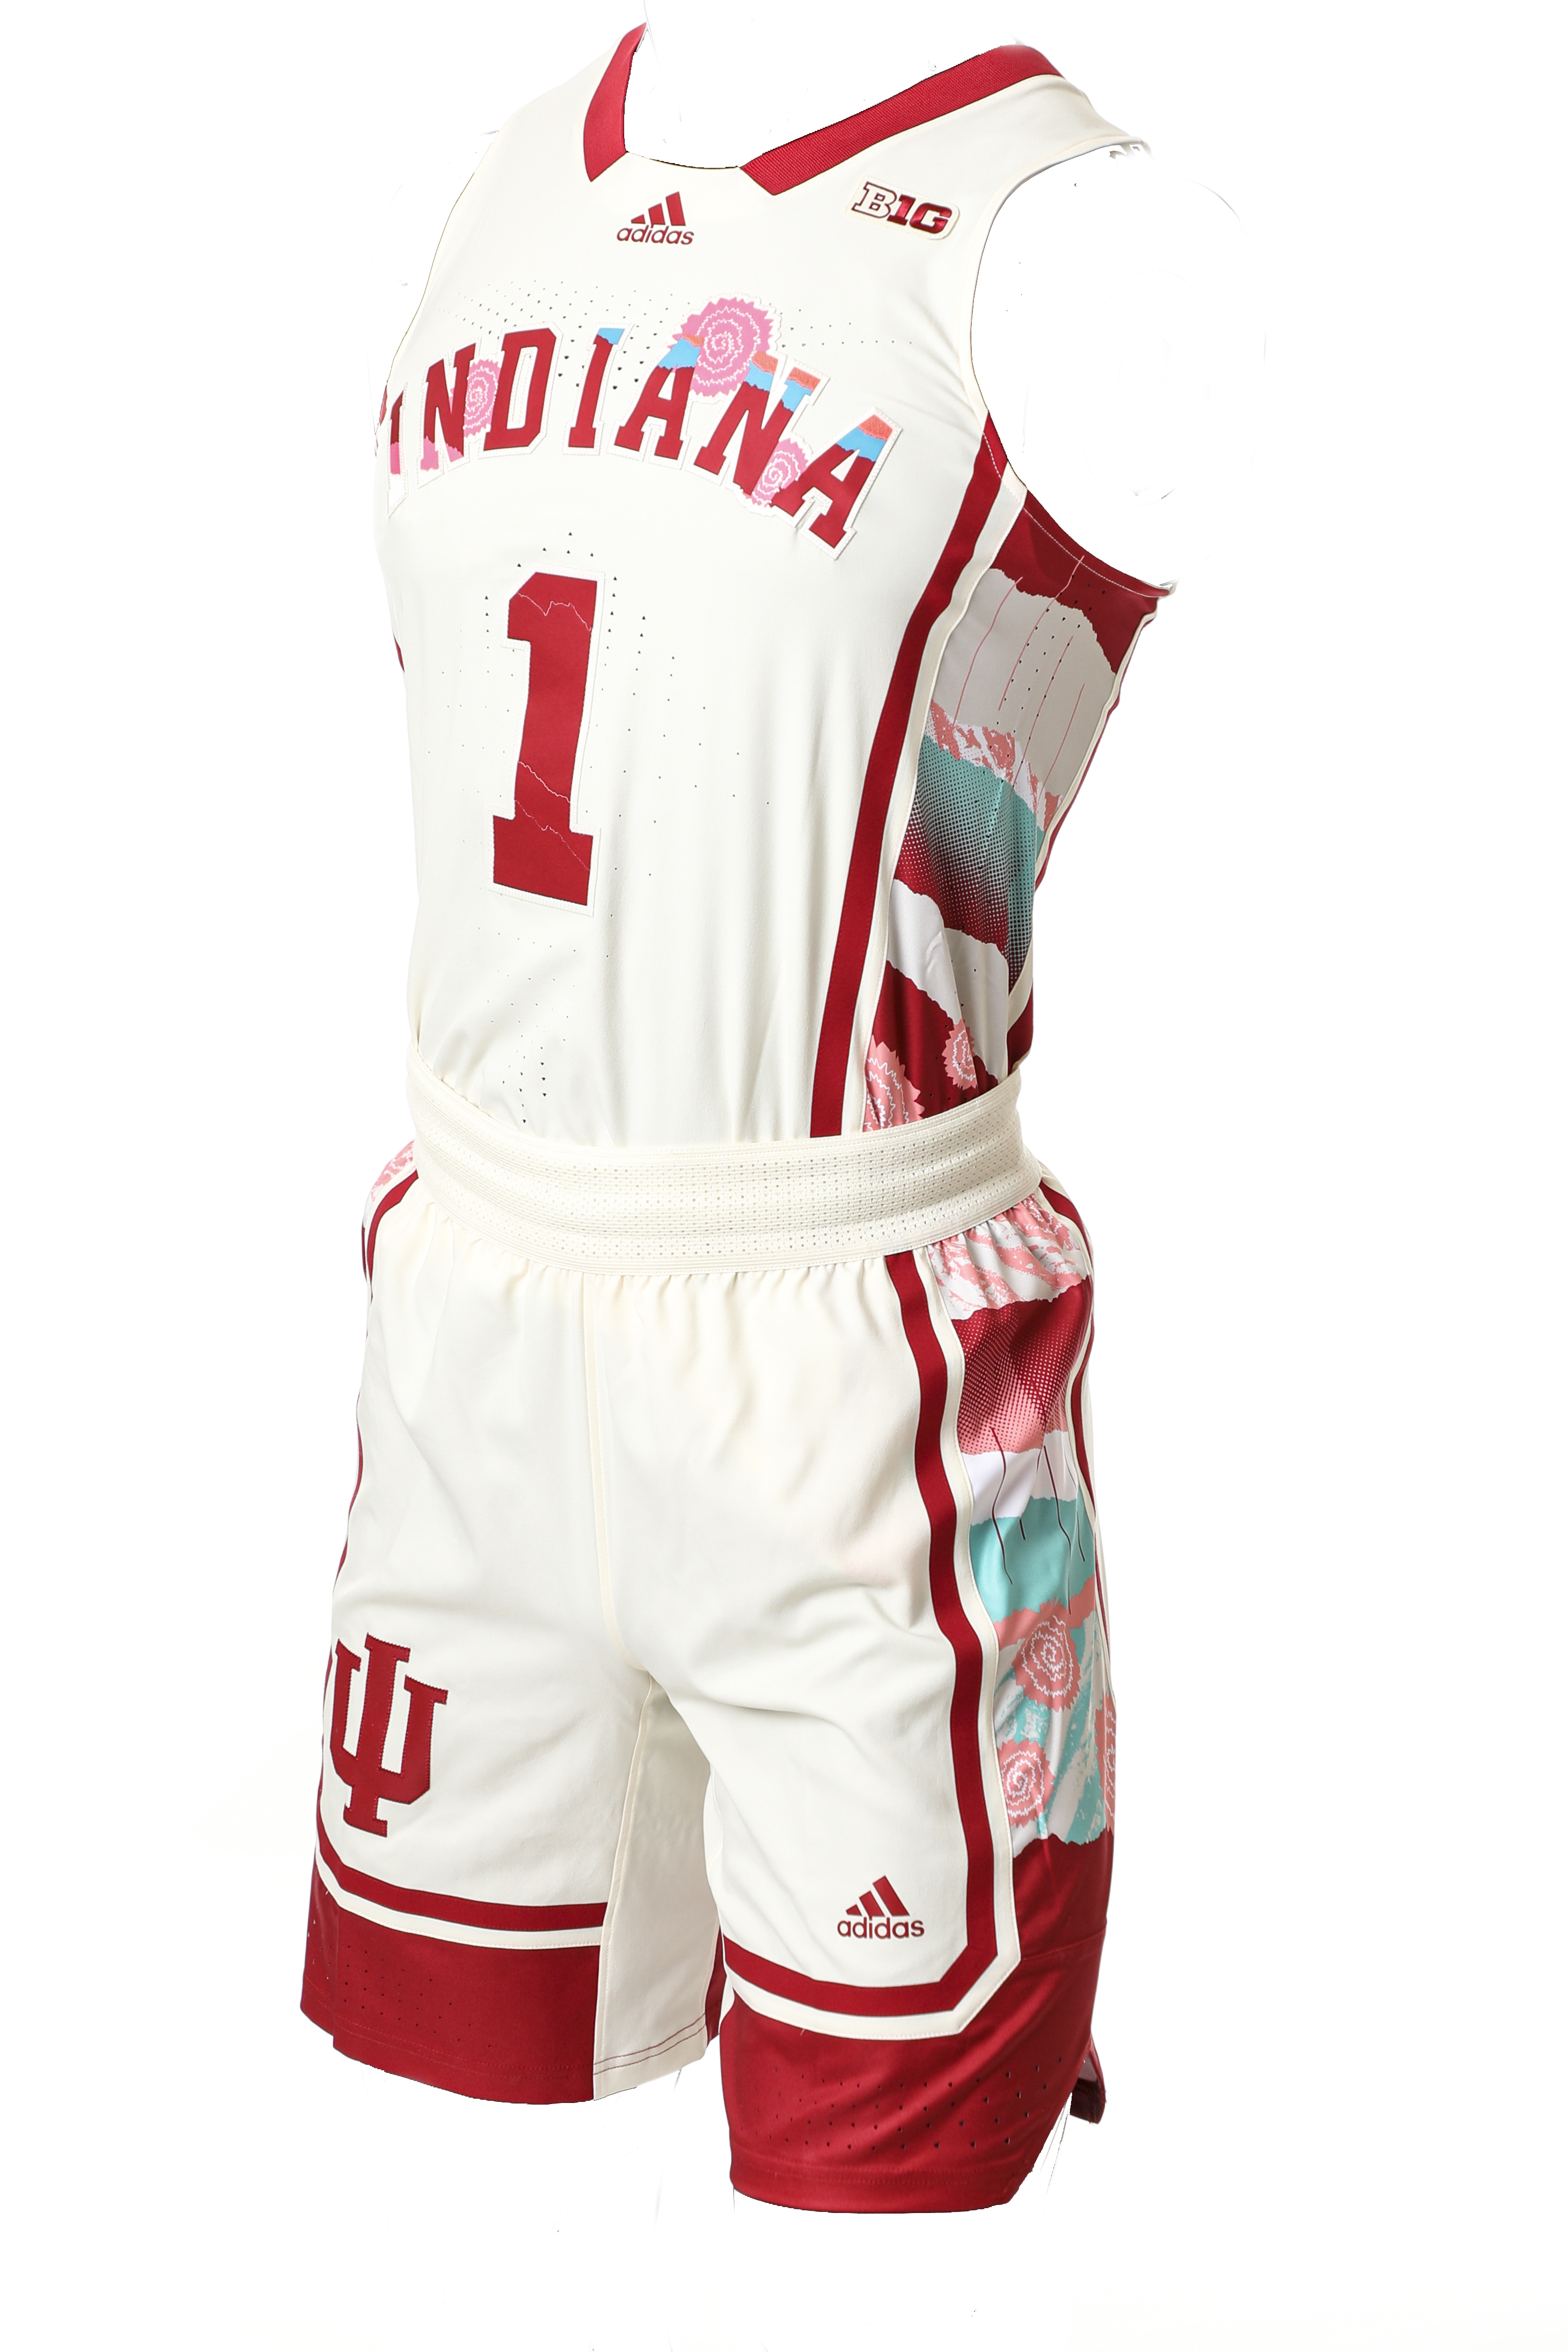 adidas Unveils Armed Forces Classic Uniforms for Indiana, Kansas -  TheHoosier